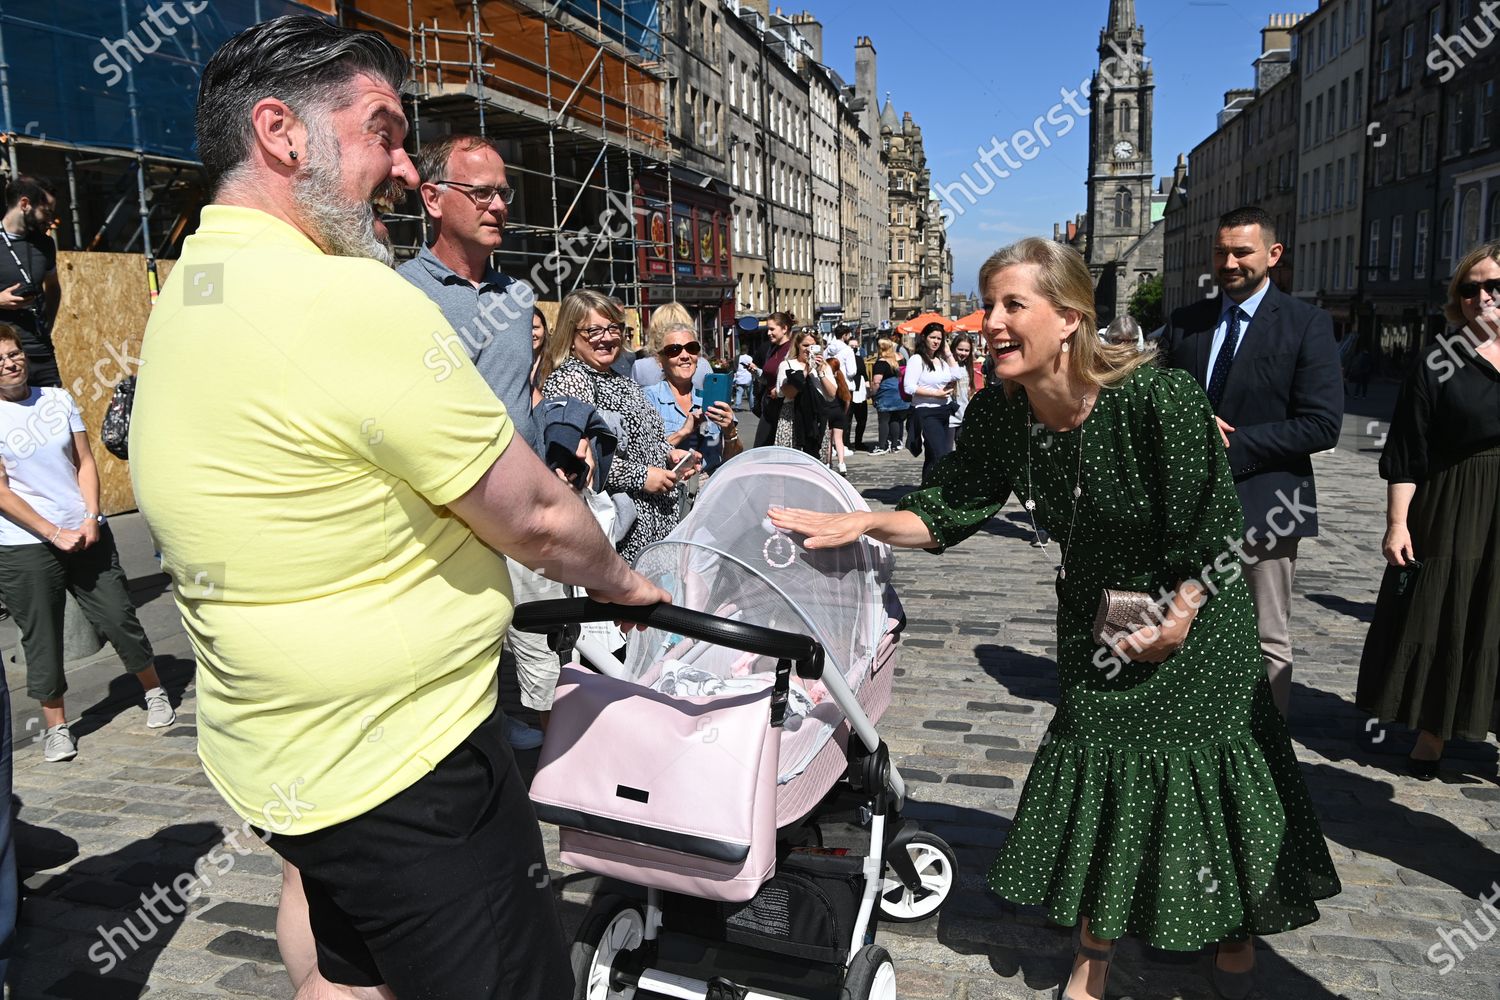 prince-edward-and-sophie-countess-of-wessex-visit-to-edinburgh-scotland-uk-shutterstock-editorial-12173651cn.jpg